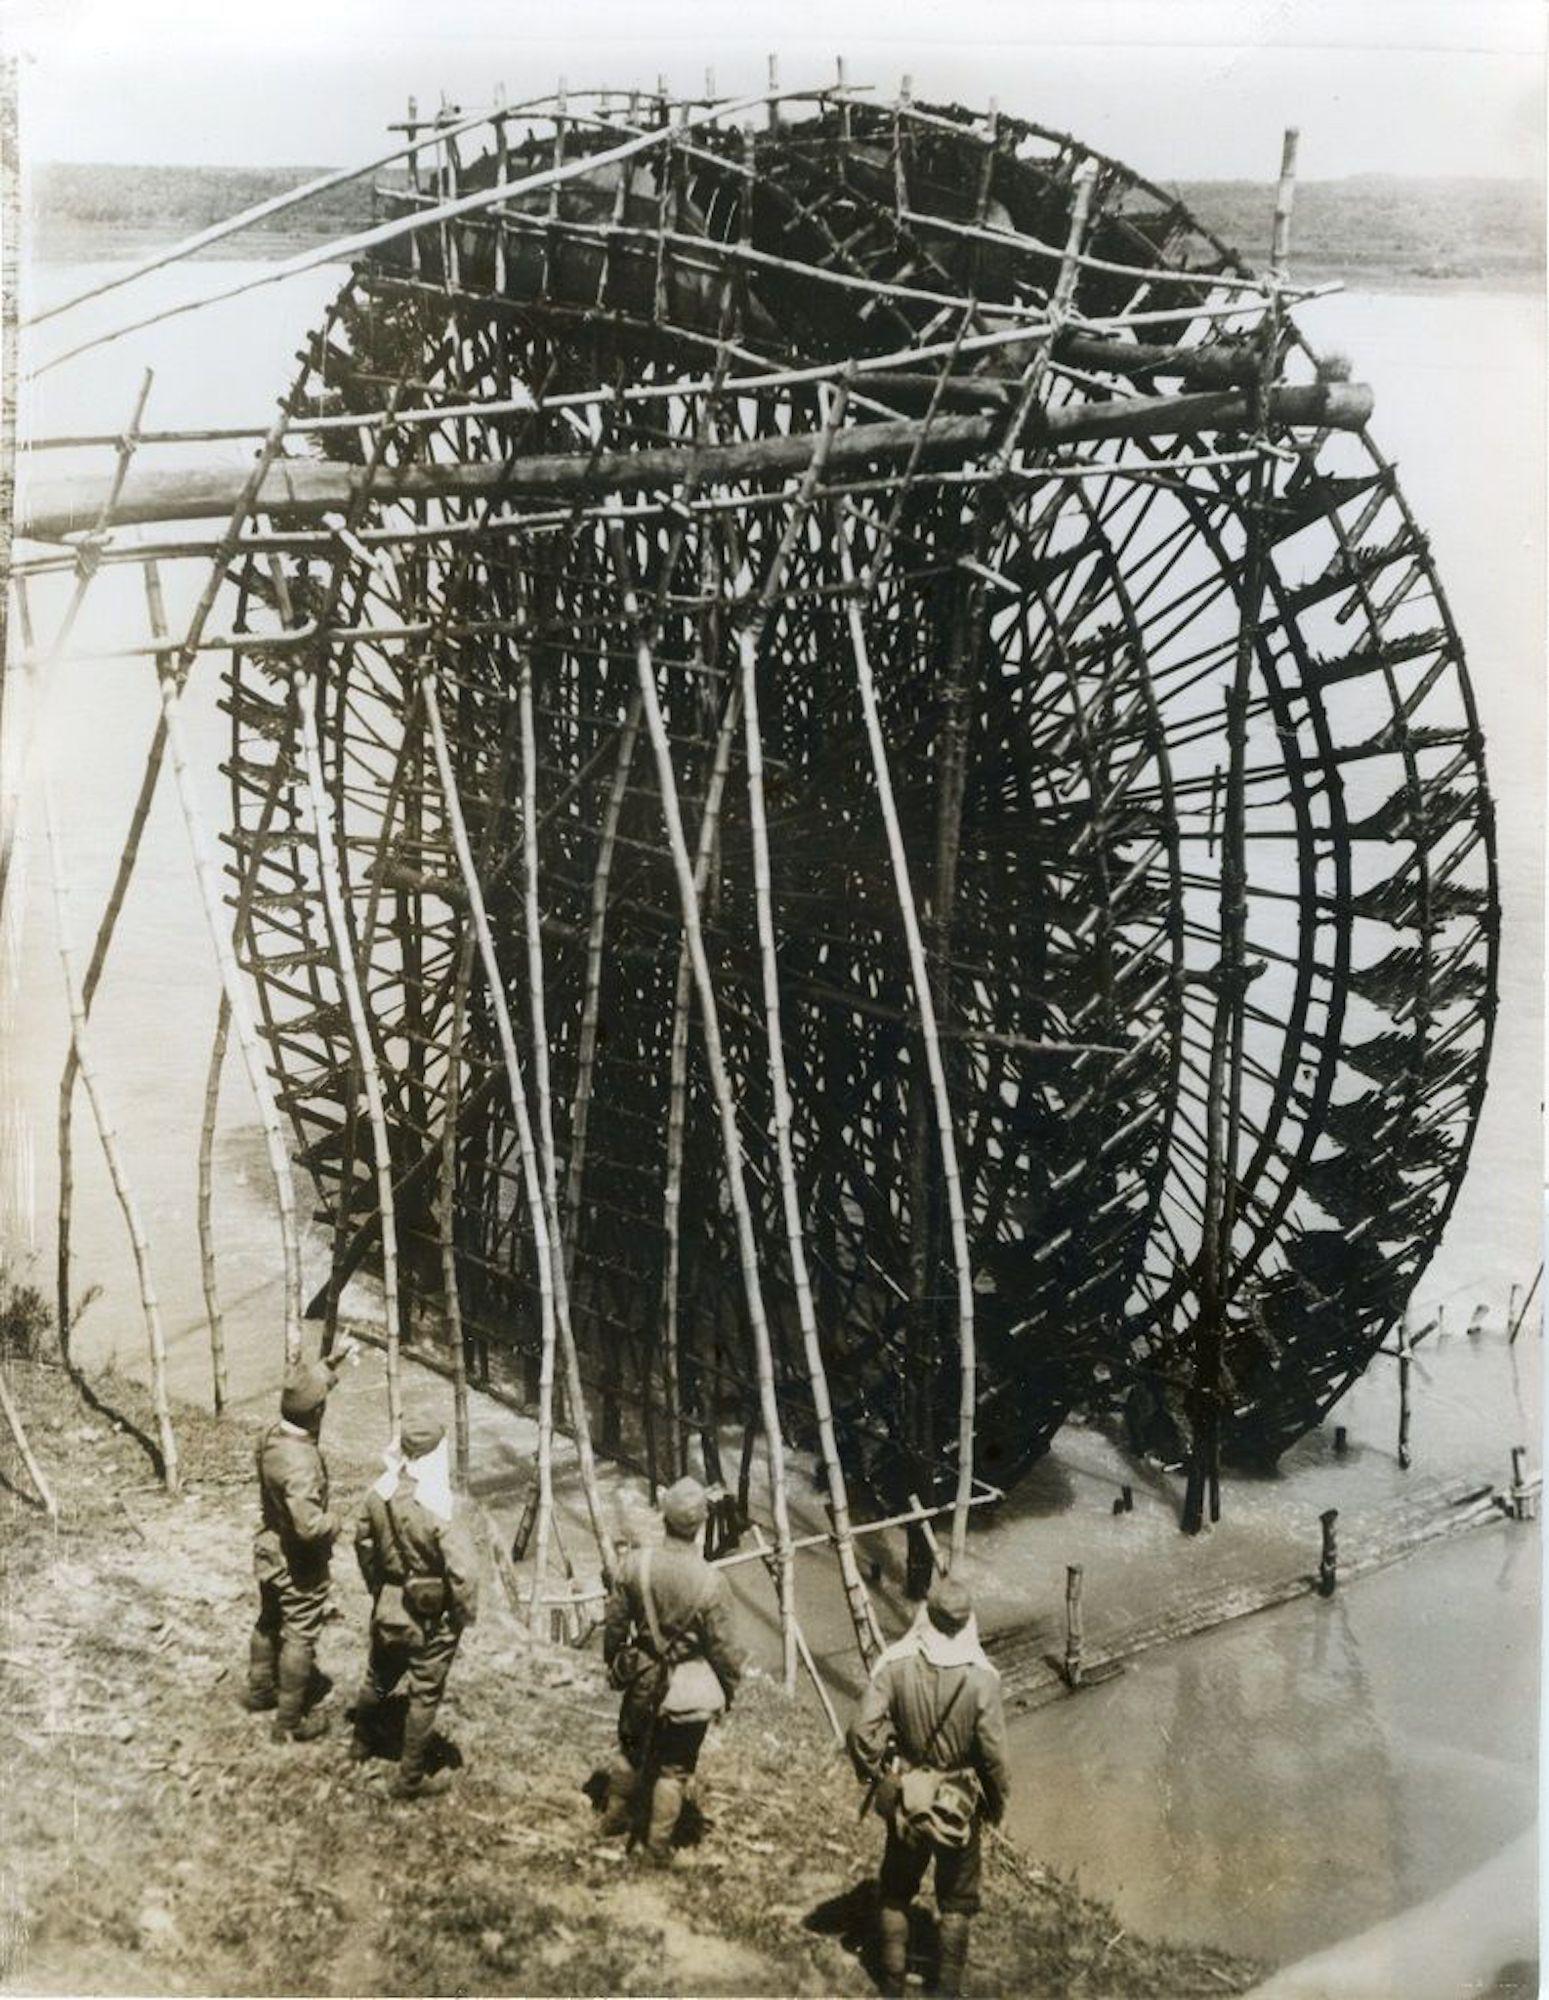 Unknown Black and White Photograph - Giant hydro-pump in Hainan - Vintage Photo 1939